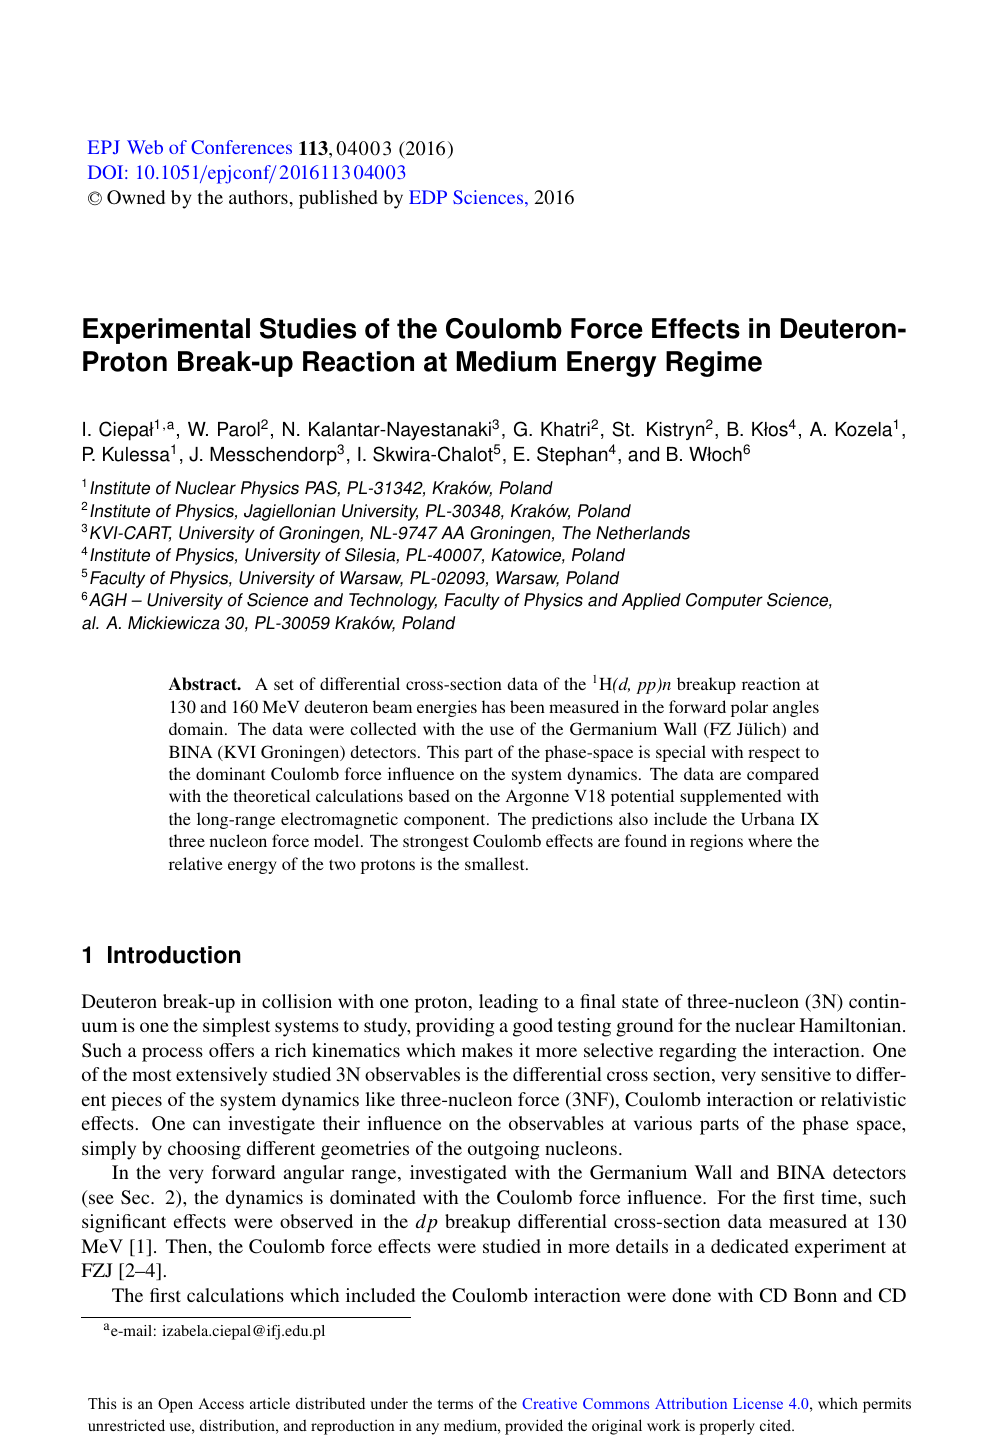 Experimental Studies Of The Coulomb Force Effects In Deuteron Proton Break Up Reaction At Medium Energy Regime Topic Of Research Paper In Physical Sciences Download Scholarly Article Pdf And Read For Free On